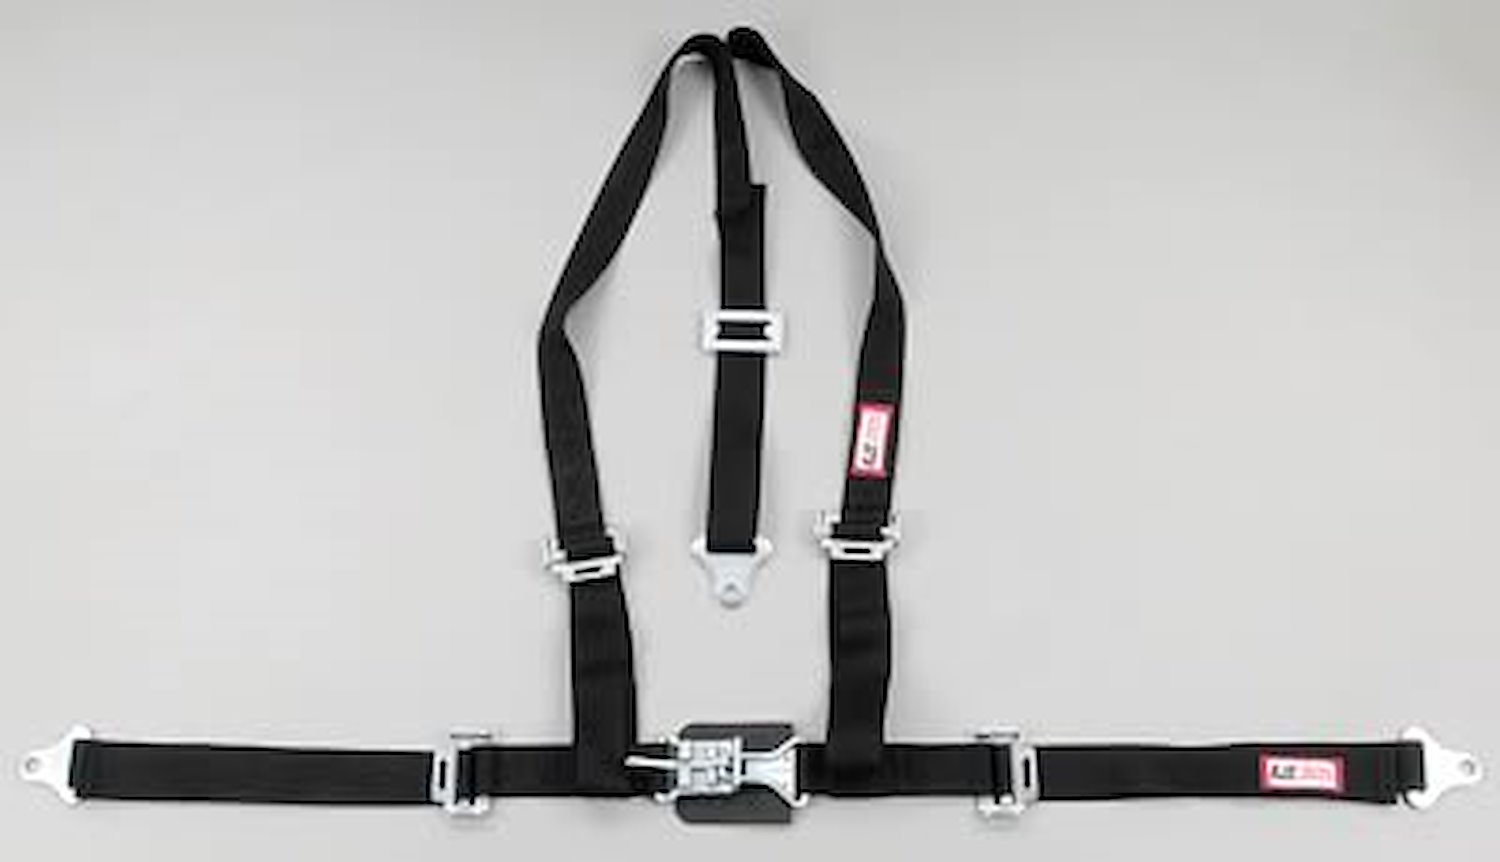 NON-SFI L&L HARNESS 2 PULL DOWN Lap Belt w/Adjuster 2 S.H. Individual FLOOR Mount ALL WRAP ENDS BLACK